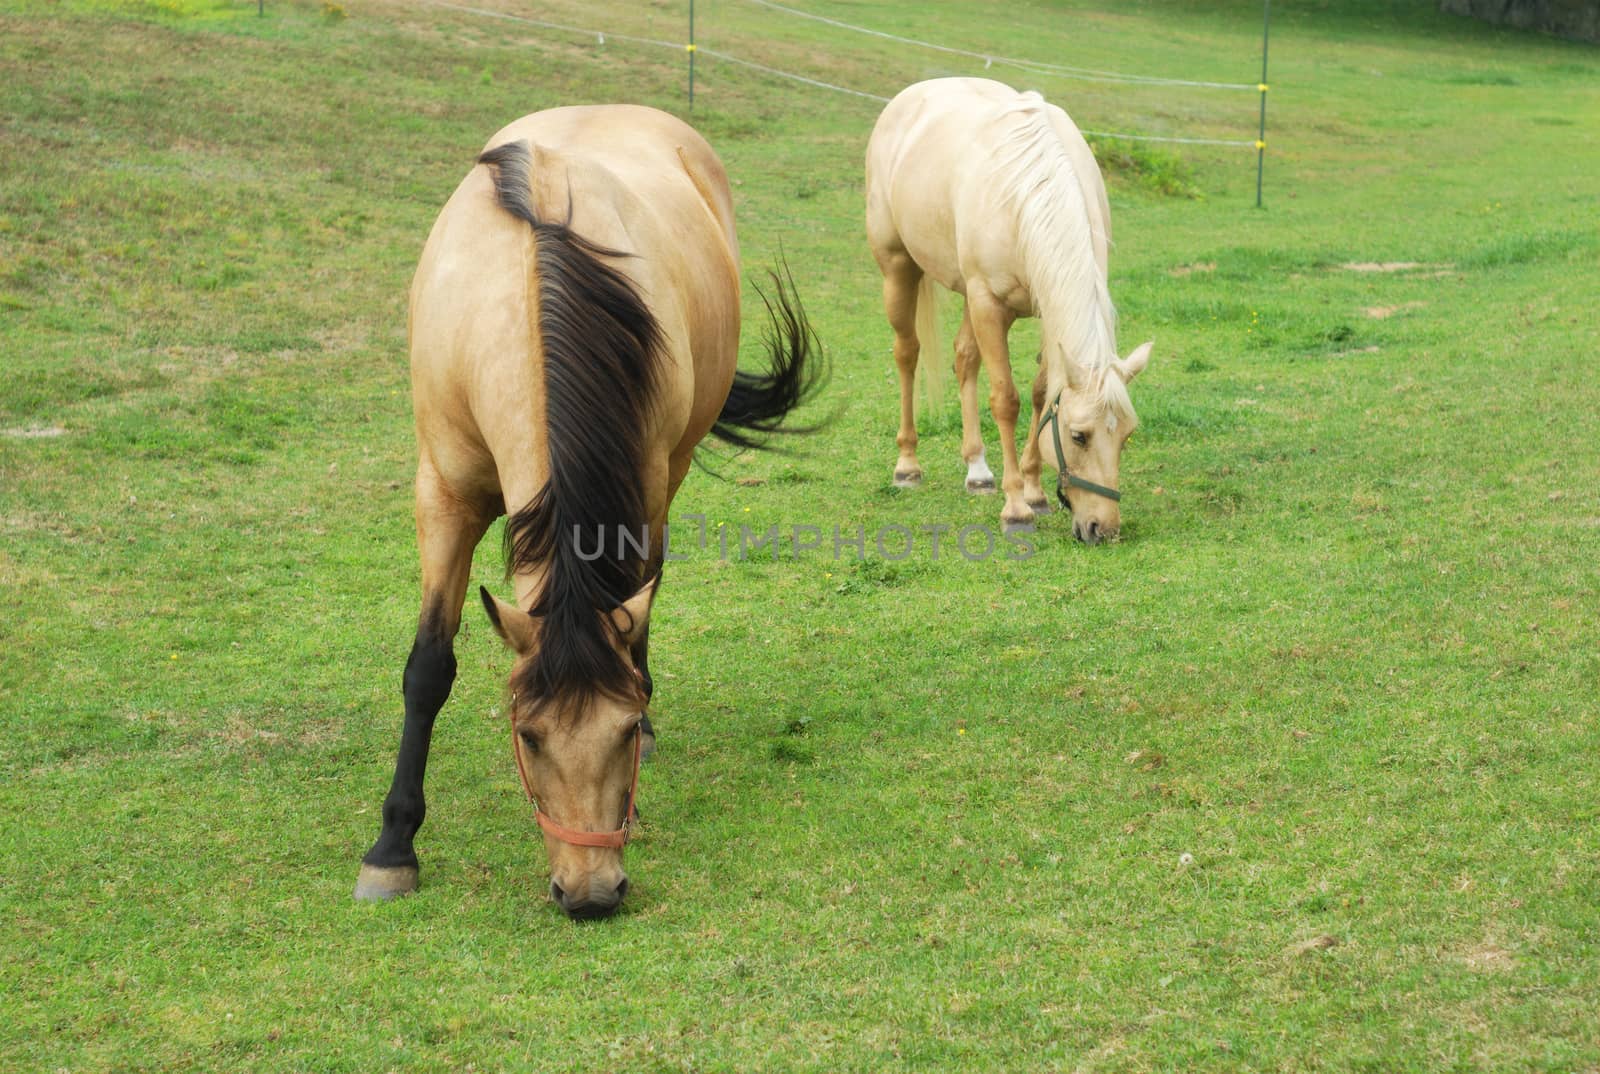 horses eating grass in a green field, countryside rural scene